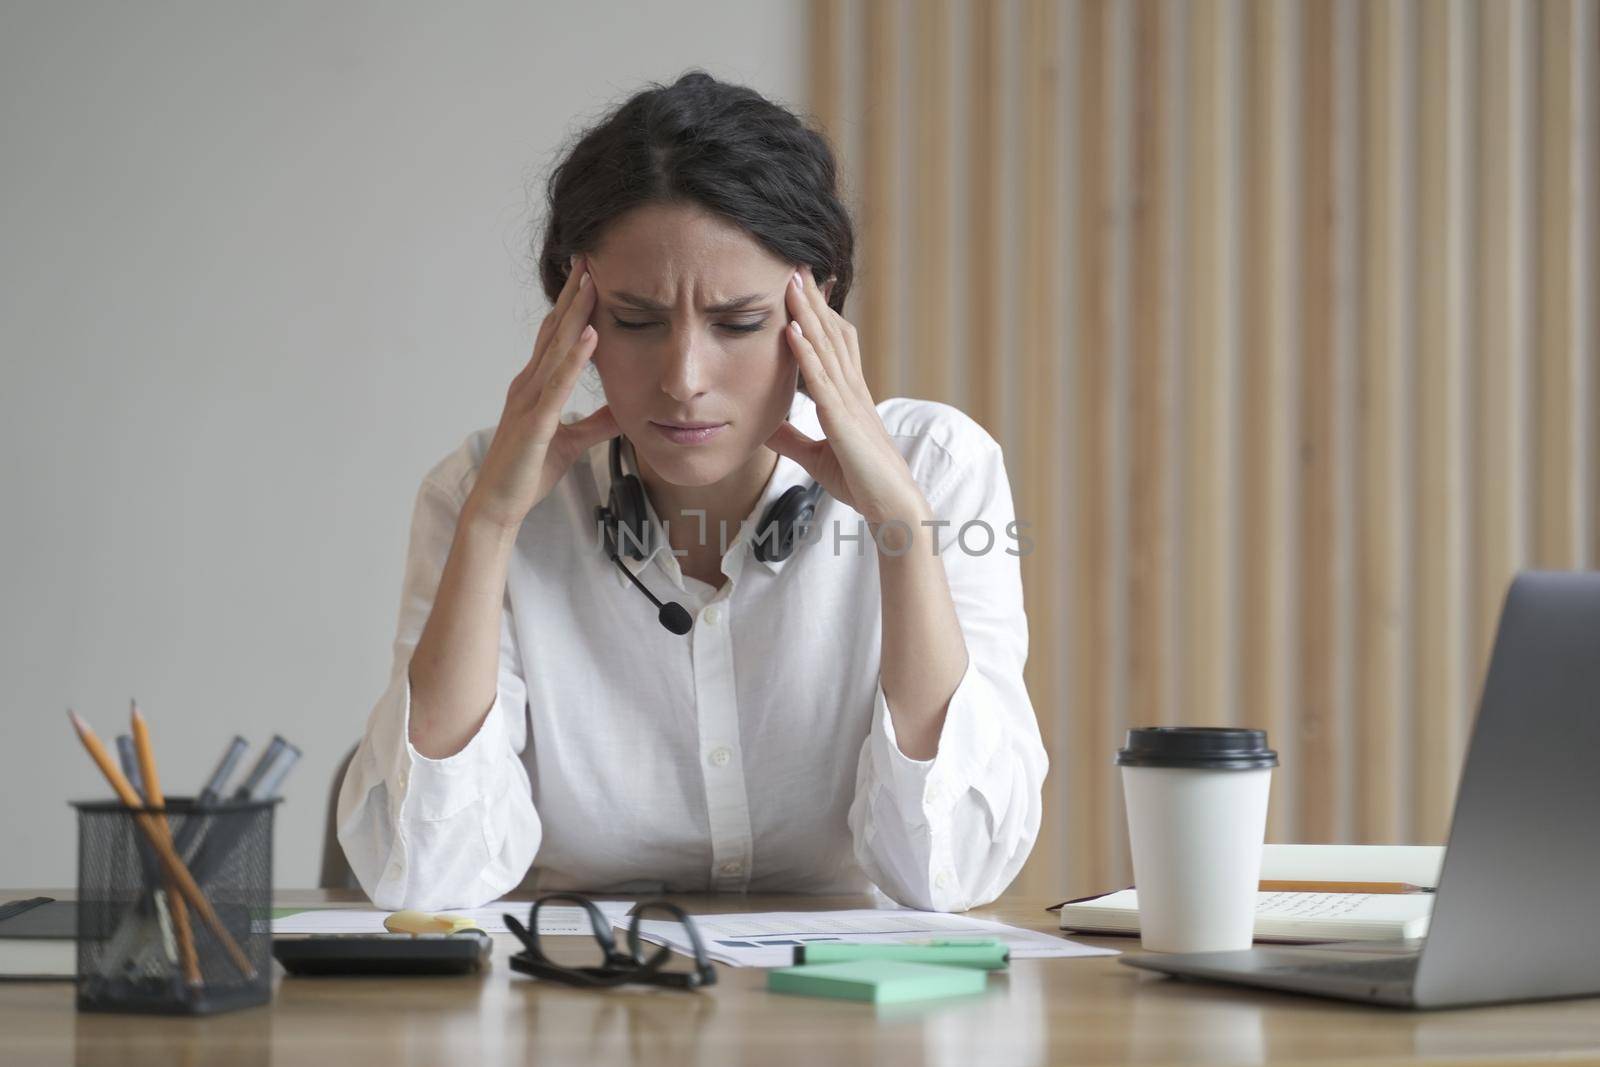 Stressed entrepreneur lady suffering from headache massaging temples while sitting at home office by vkstock